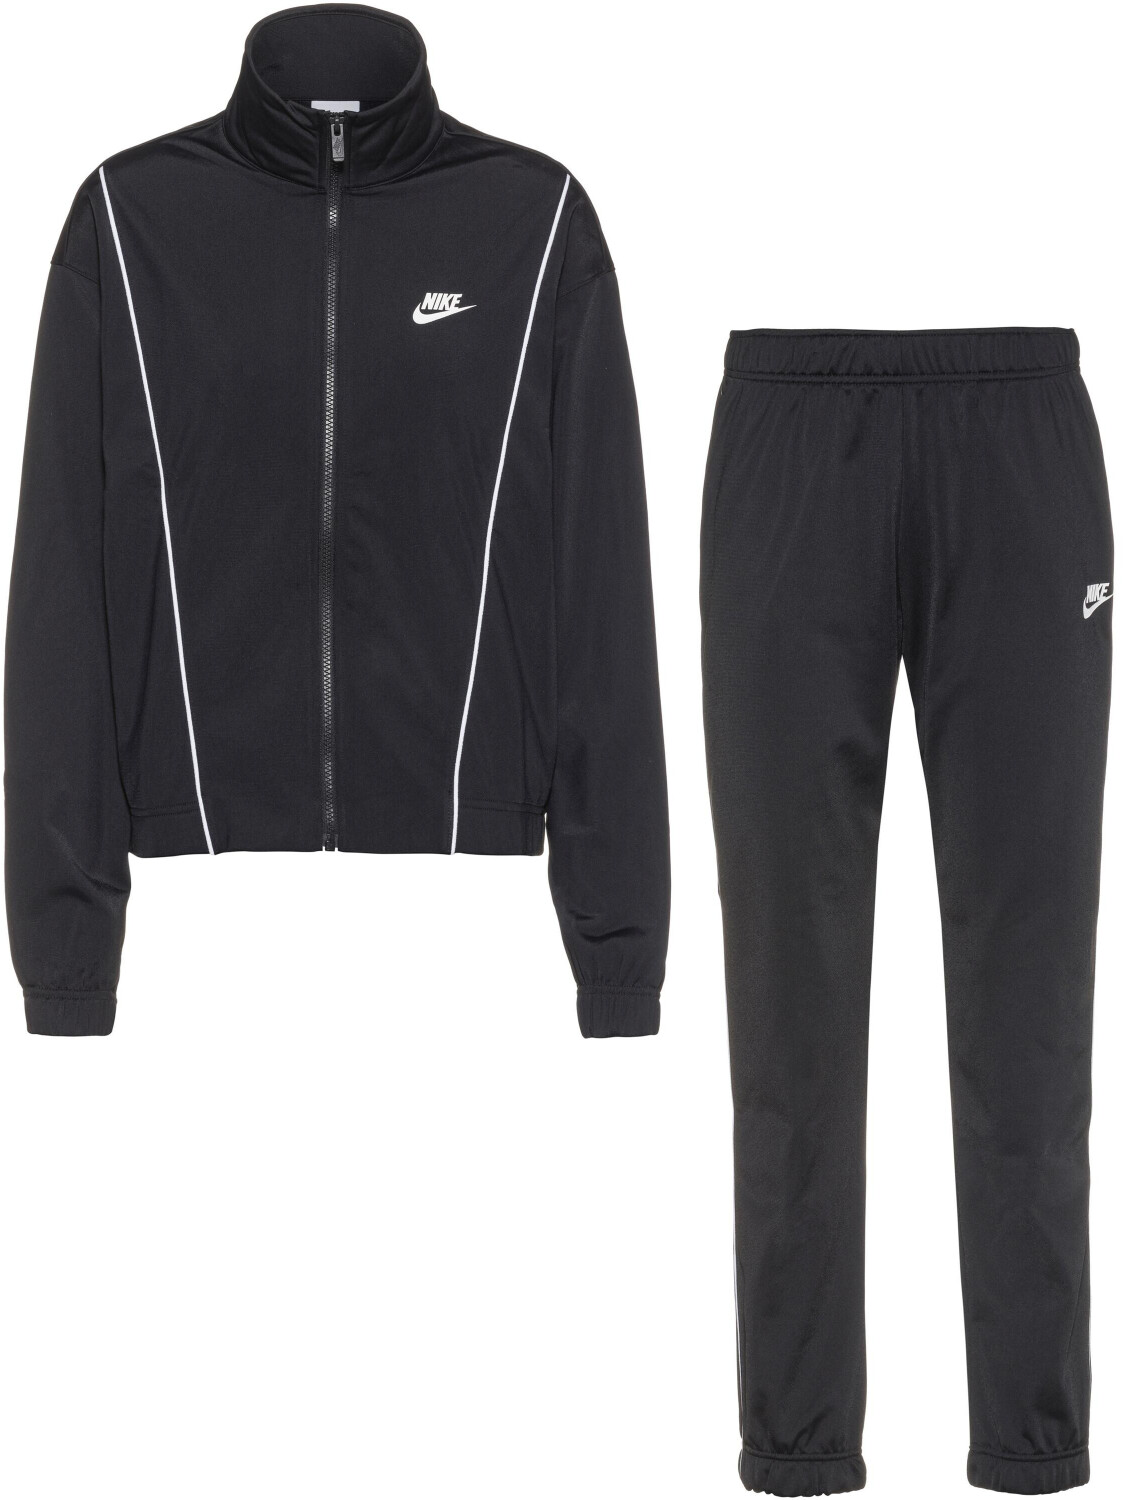 Buy Nike Woman Track Suit (DD5860) from £22.99 (Today) – Best Deals on ...